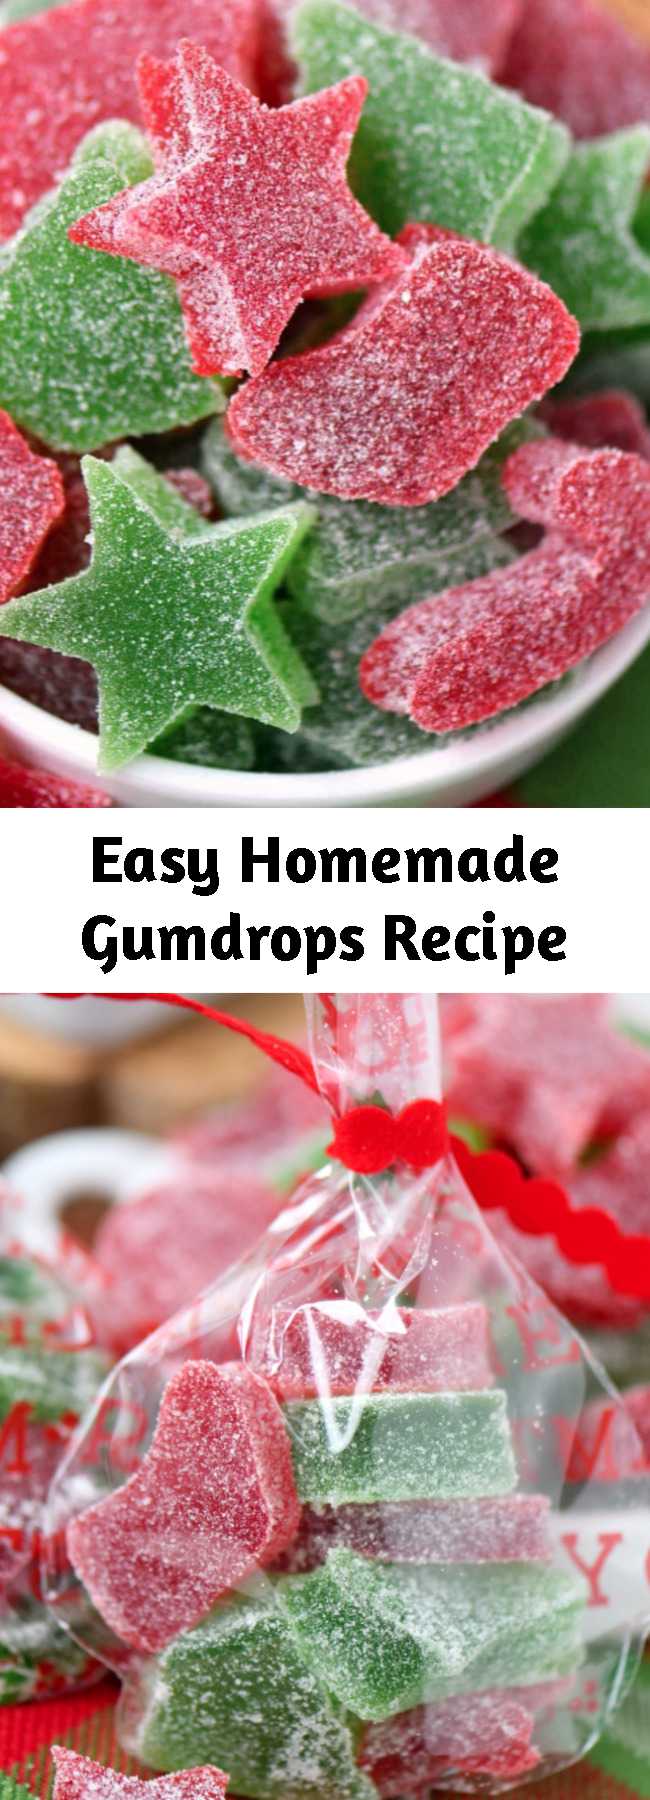 Easy Homemade Gumdrops Recipe - These Homemade Gumdrops are the perfect treat to make for friends and family during the holidays! Made with just a handful of ingredients – including applesauce – this easy gumdrop are sure to become a holiday tradition! A Christmas favorite with our family!